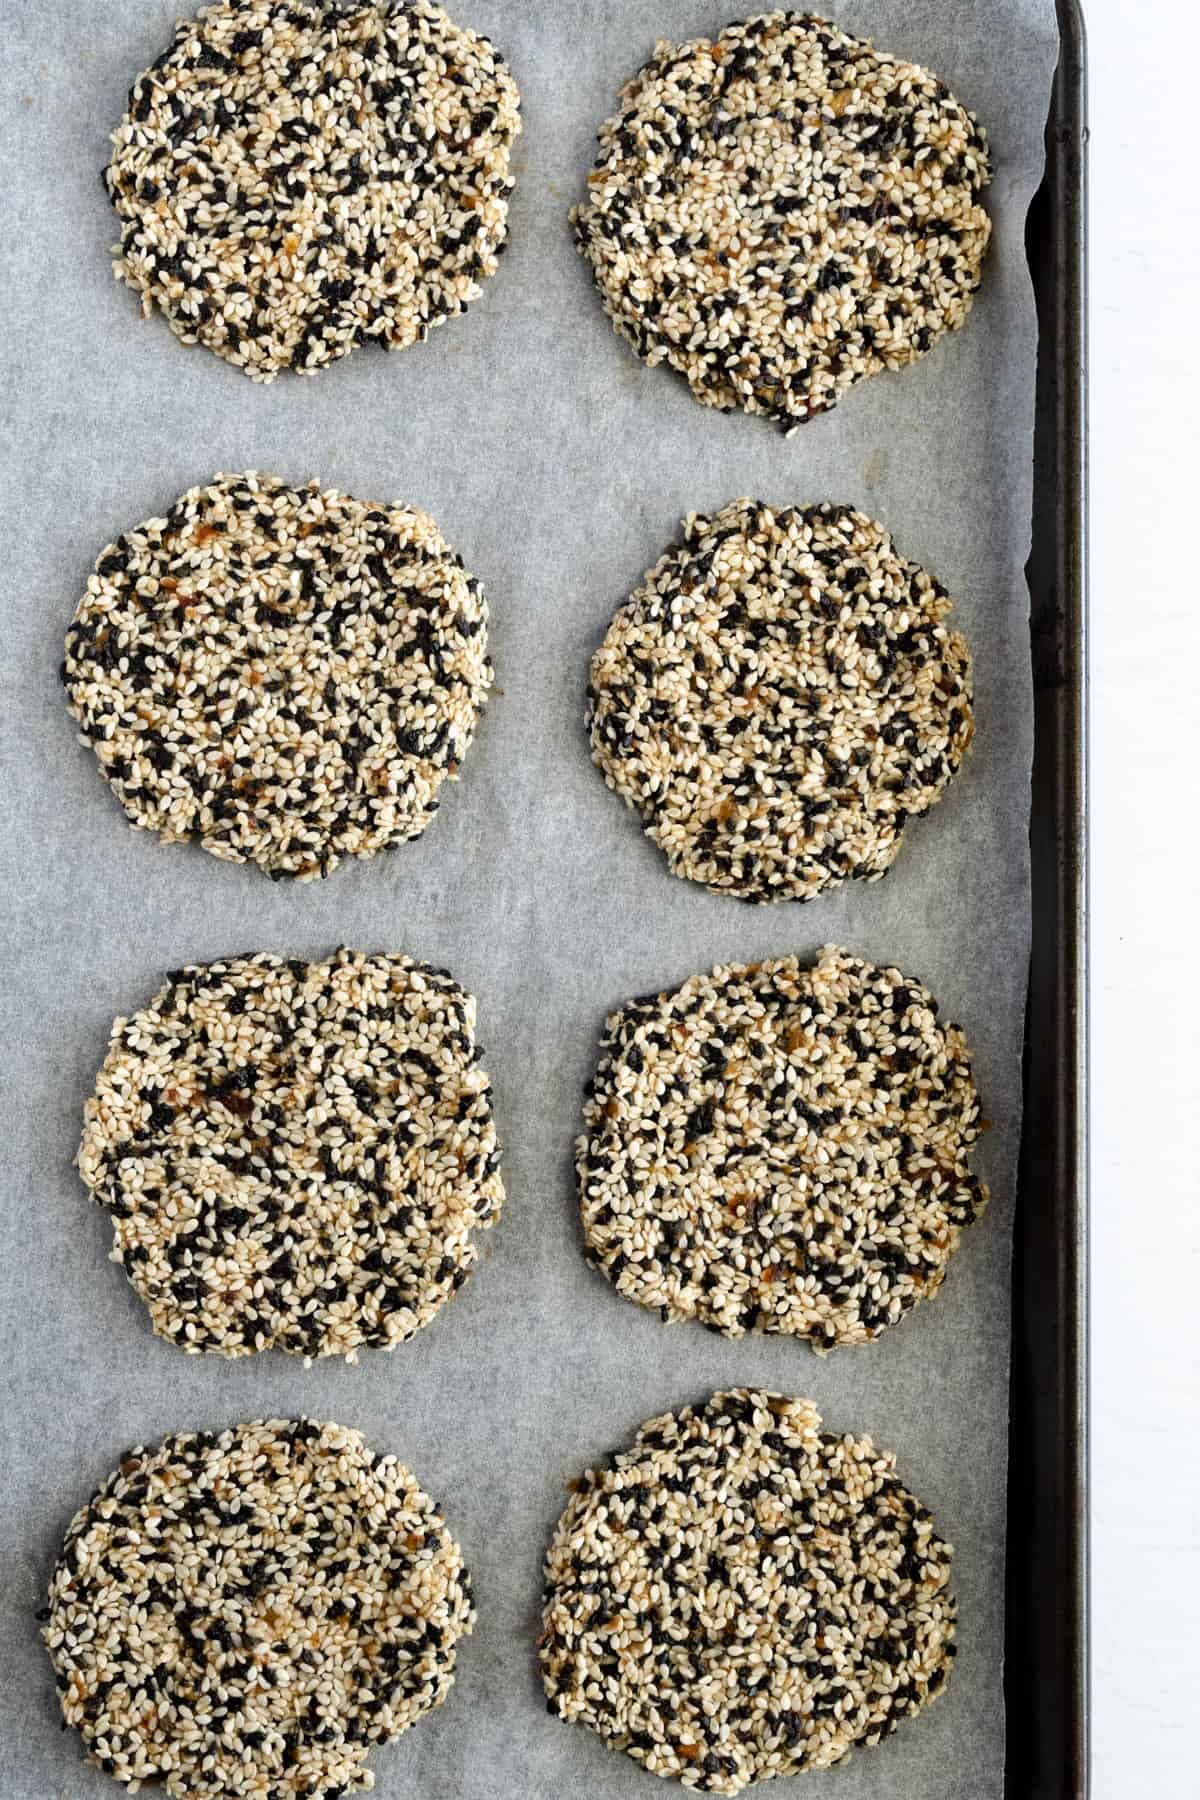 8 unbaked sesame cookies on a baking tray